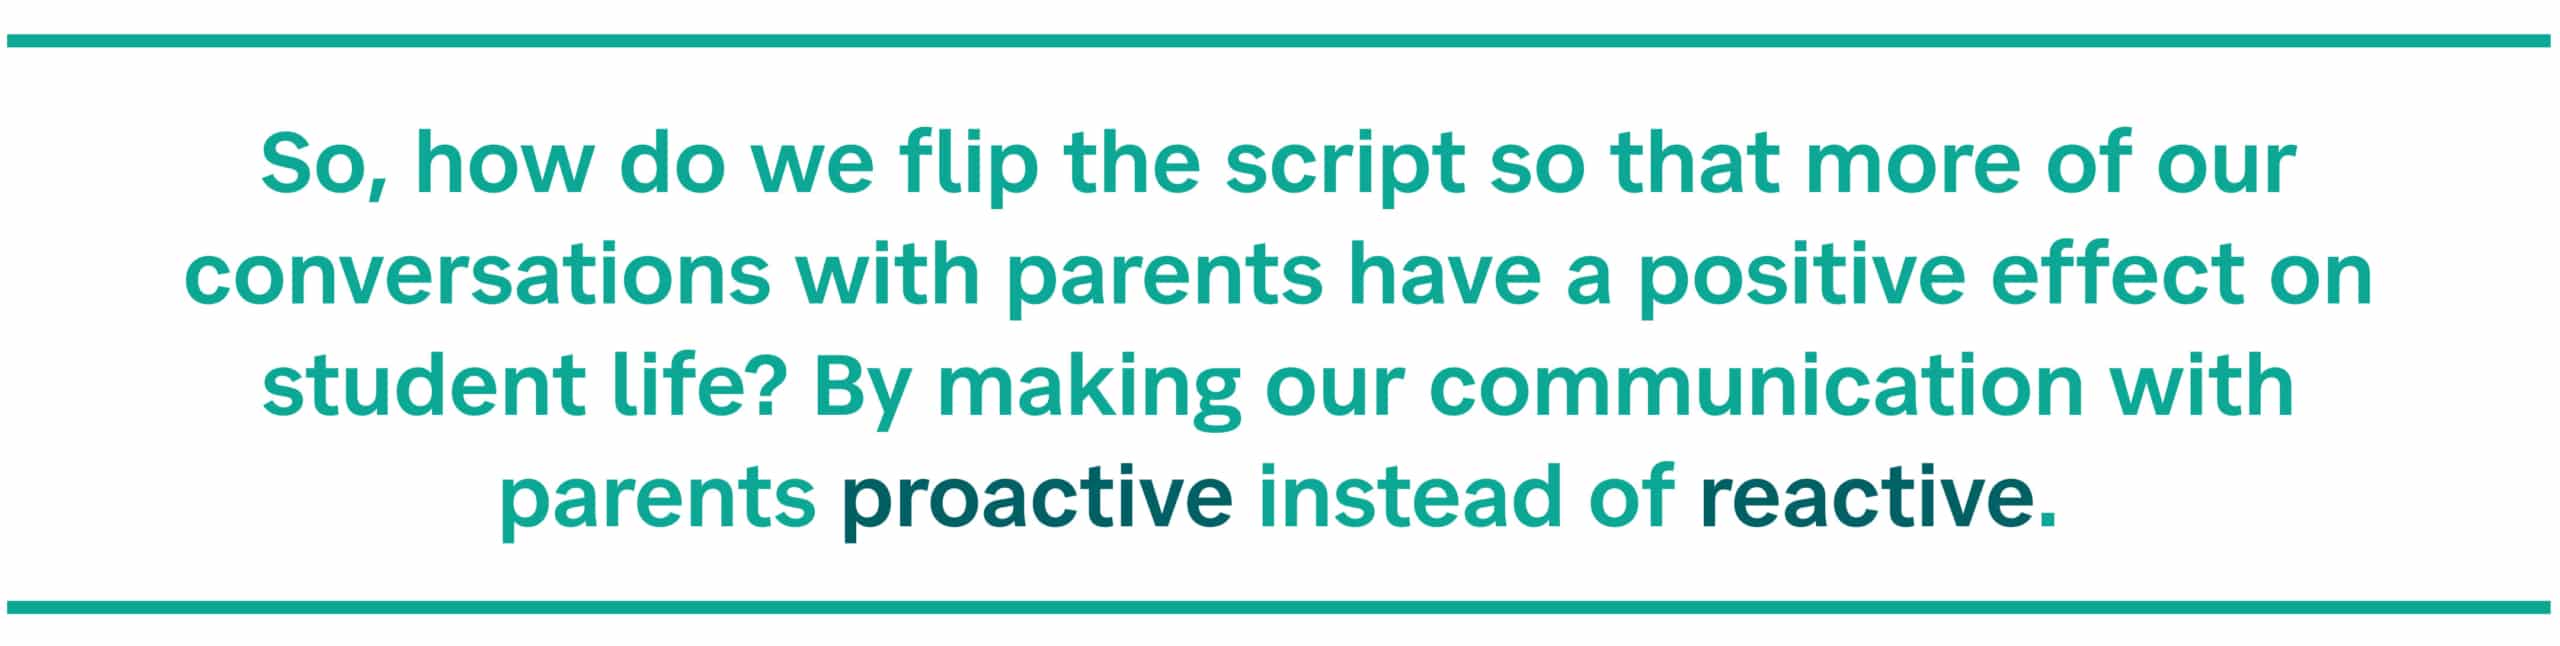 So, how do we flip the script so that more of our conversations with Families have a positive effect on student life? By making our communication with Families proactive instead of reactive.